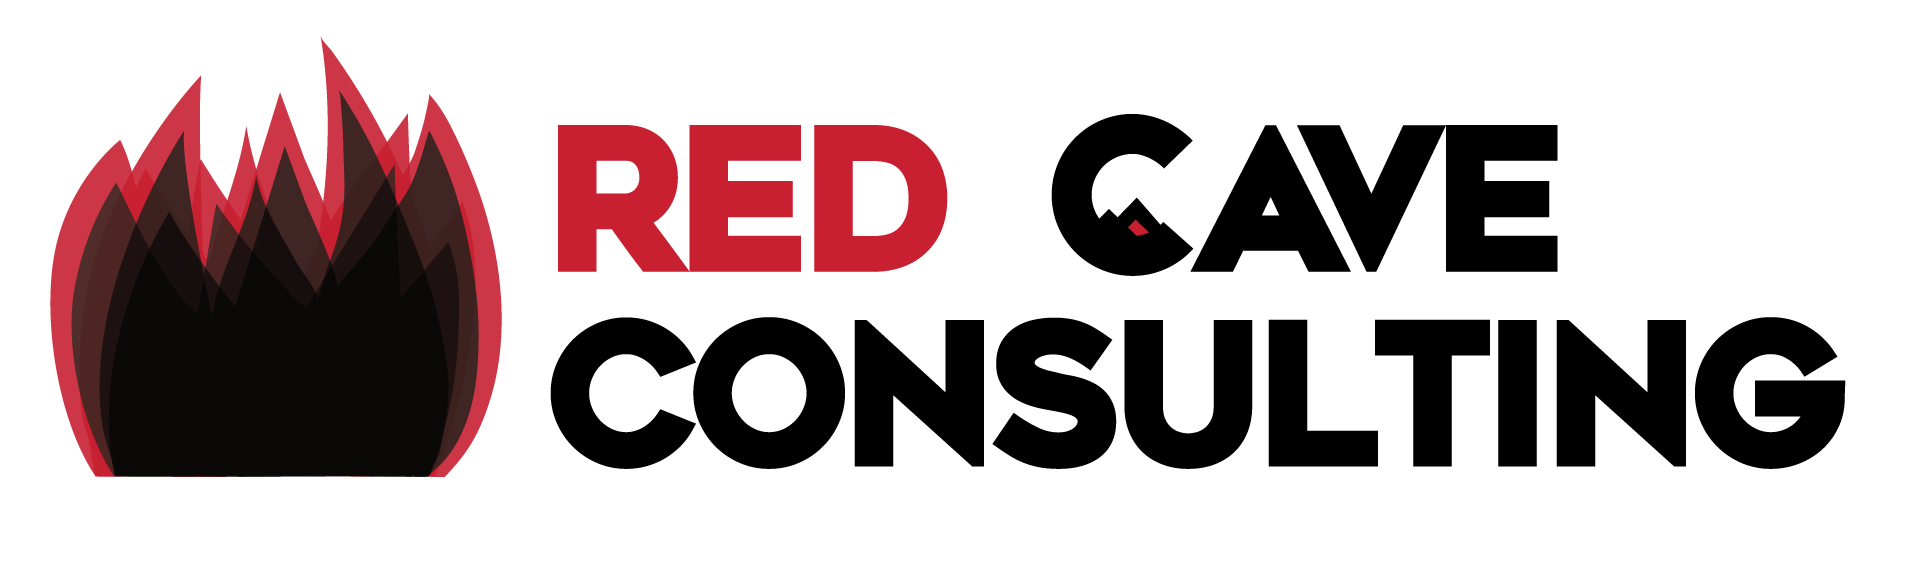 Red Law Logo - Red Cave Consulting – Red Cave Law Firm Consulting provides ...